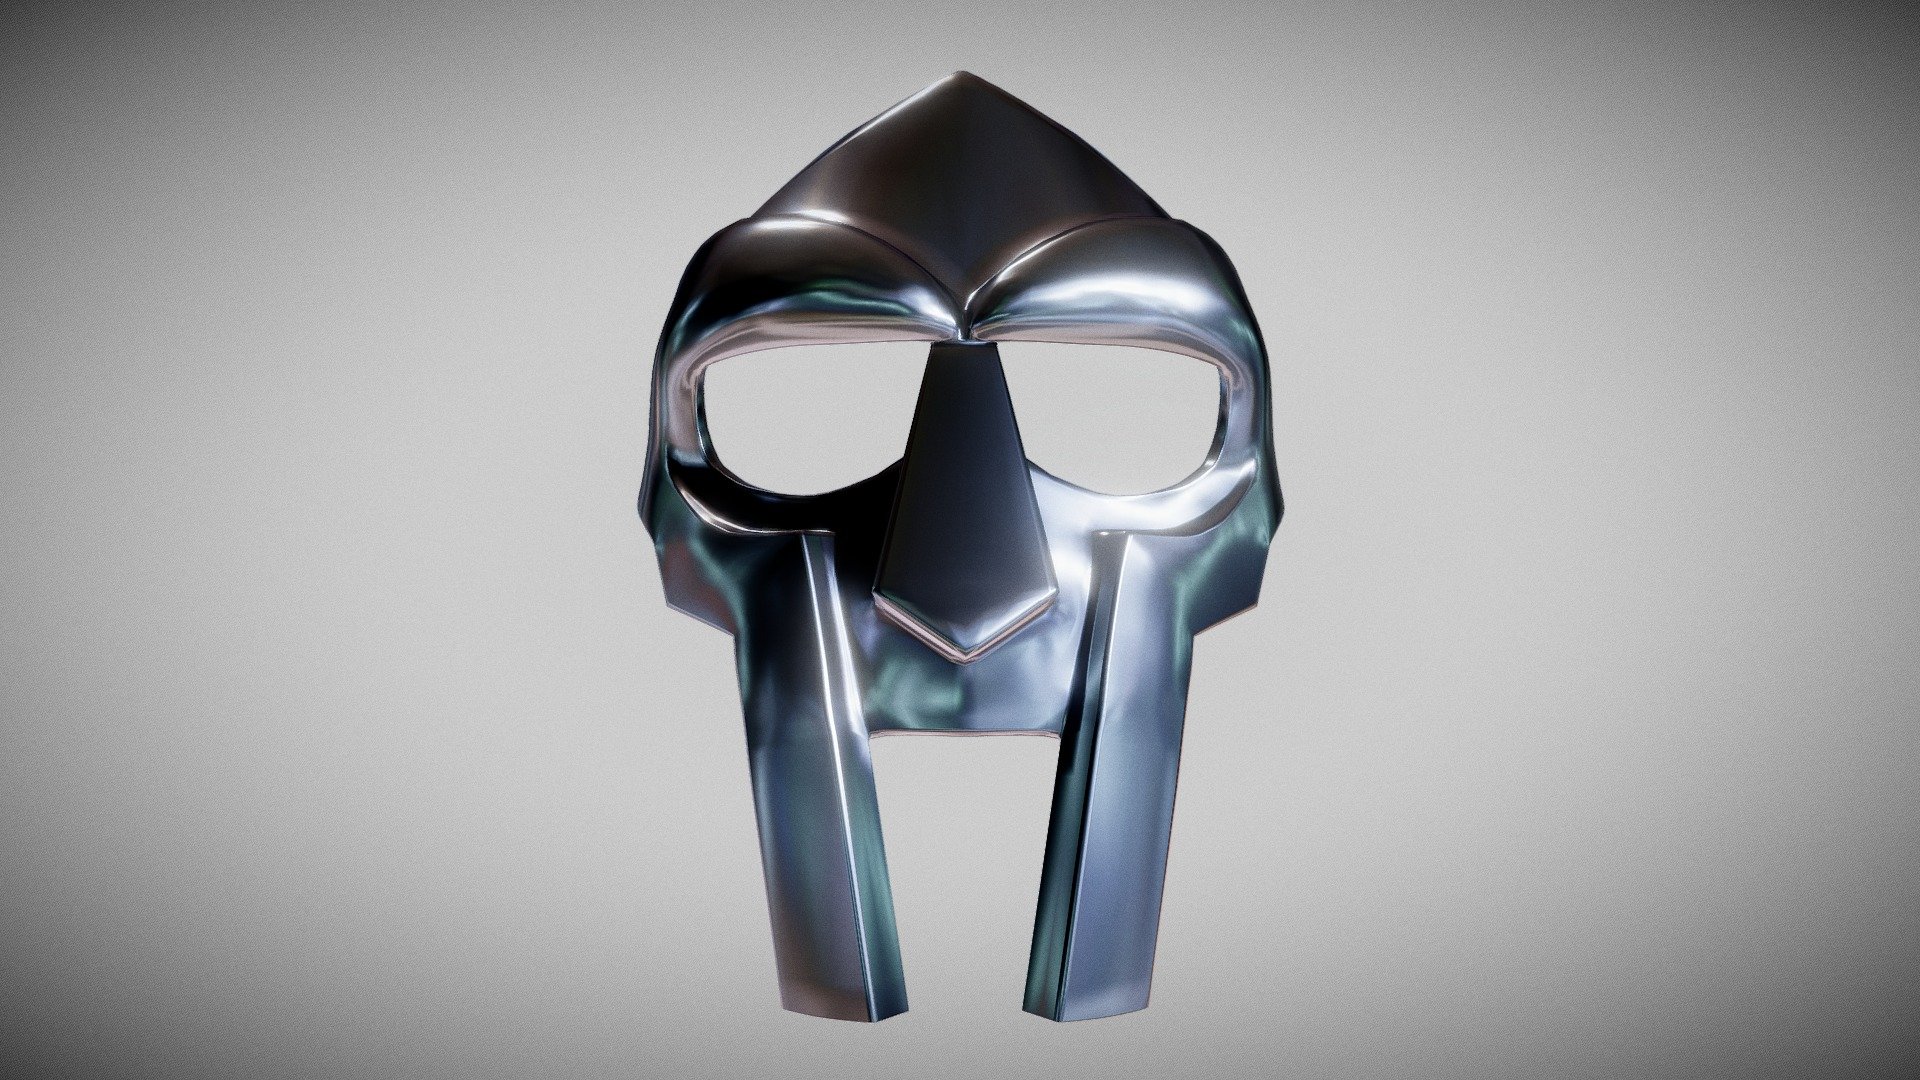 Gladiator Mask as worn by:




Hip Hop Artist MF Doom

Russel Crowe in Gladiator

Dr Doom in Fantastic Four Comics

Quads: 6695
Tris: 13412

Please message me if you need a cleaner, more shiny version of the mask 3d model